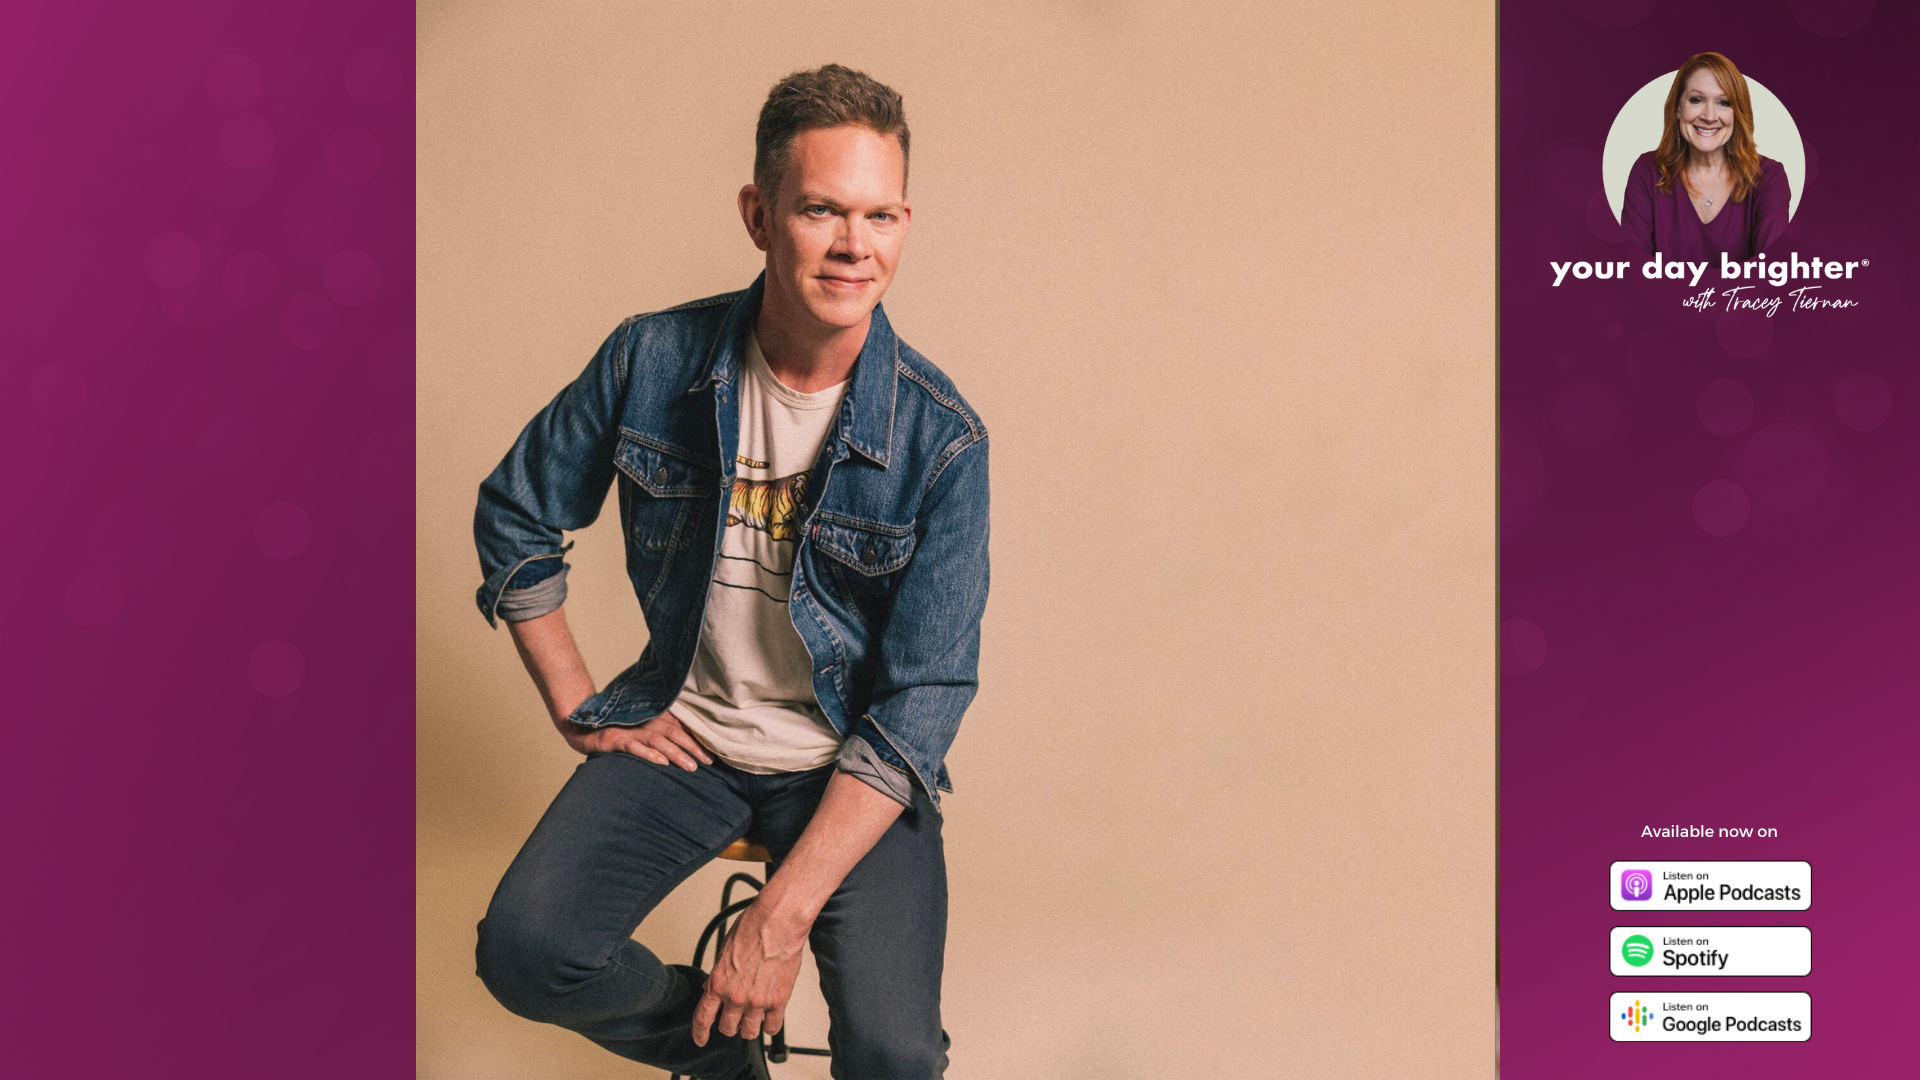 Jason Gray wearing a white tshirt and blue denim jacket while smiling and sitting on a stool against a tan background